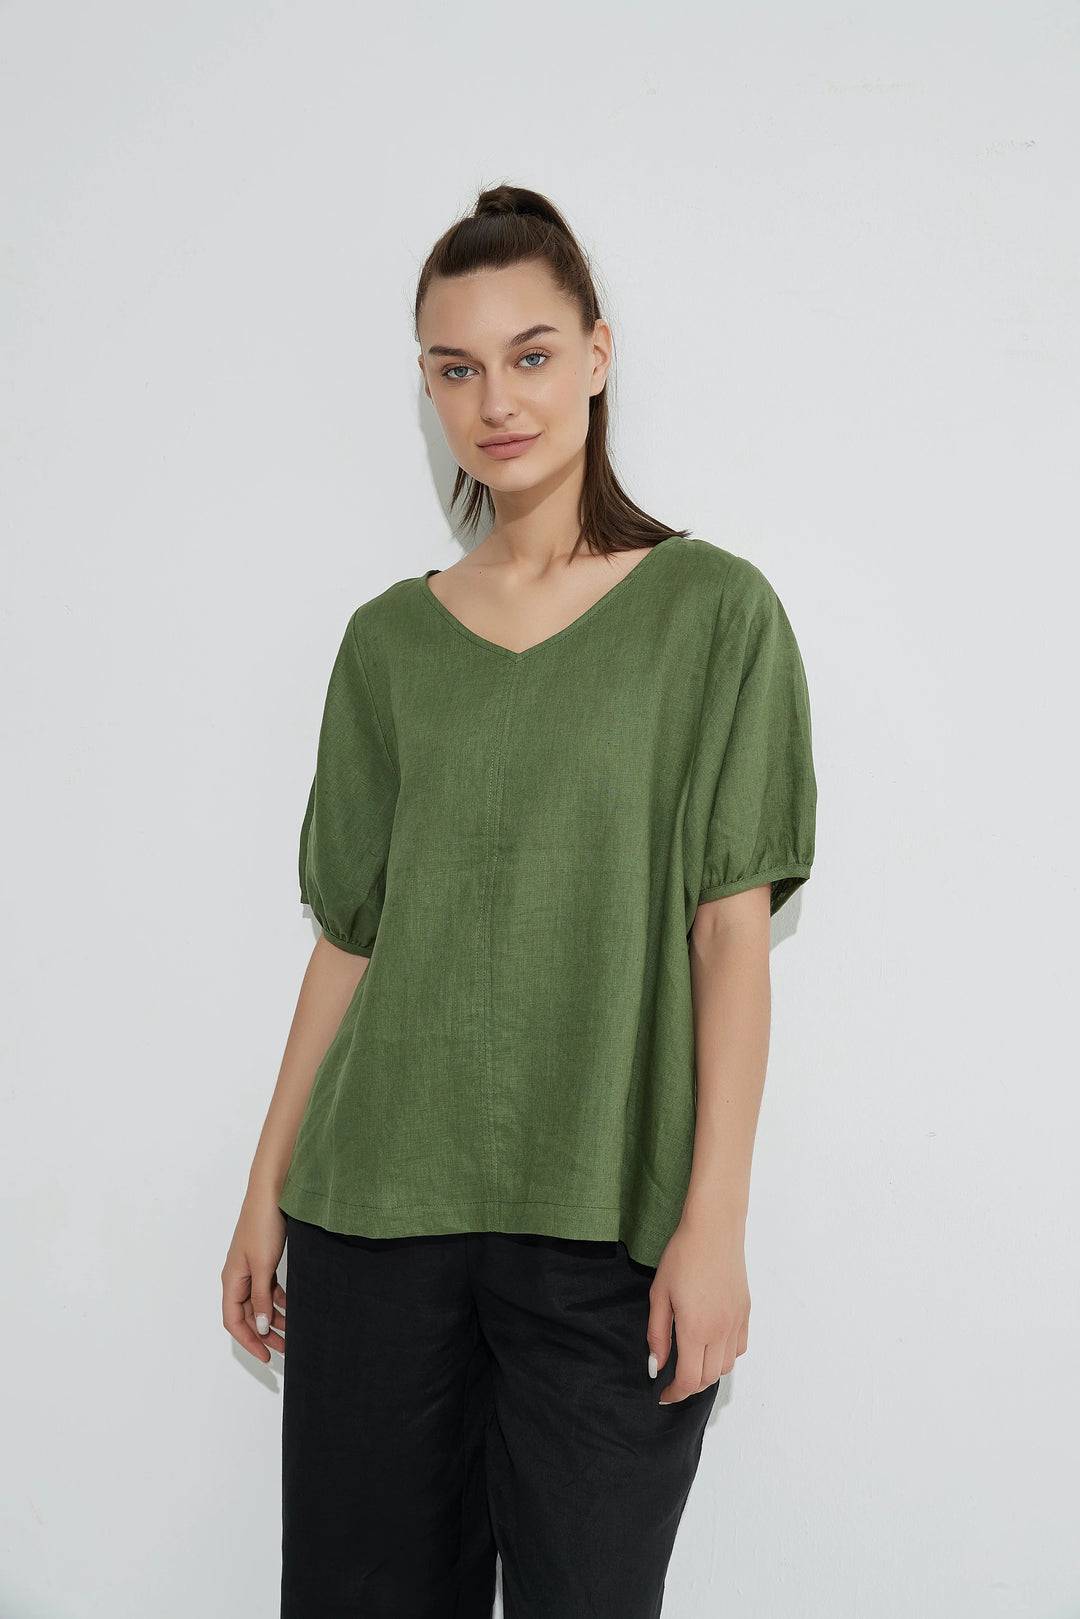 Foil 2394 Bishop Sleeve Tee Green Front Lifestyle | Dotique